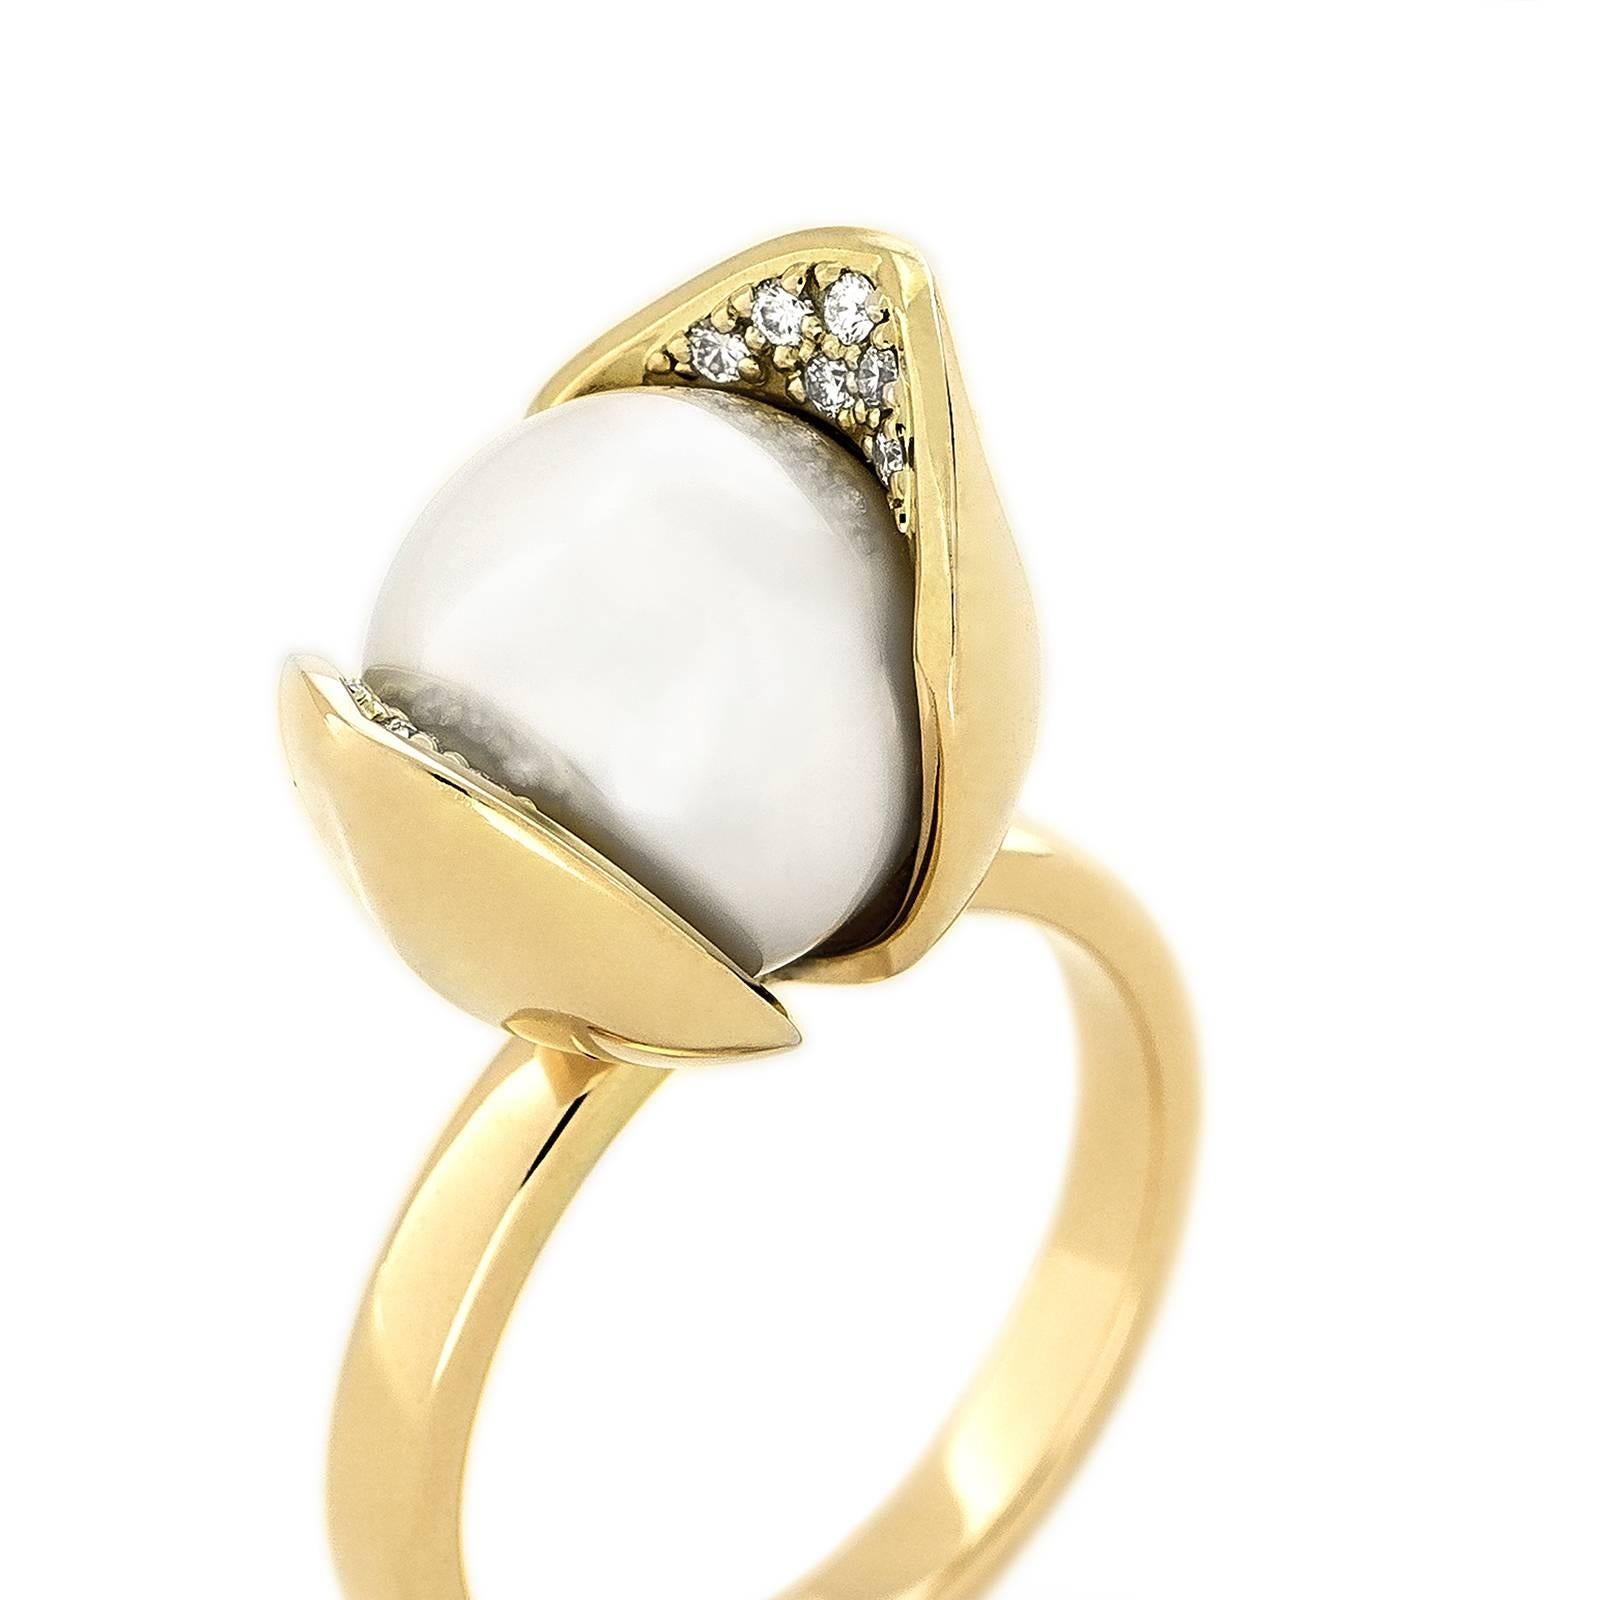 The Orchid Diamond ring encases a luminescent 10 mm South Sea cultured pearl in a delicate pod-like form. The intricate detailing of the inner petals features 0.025 tct pavé-set diamonds in 18k Fairtrade gold.